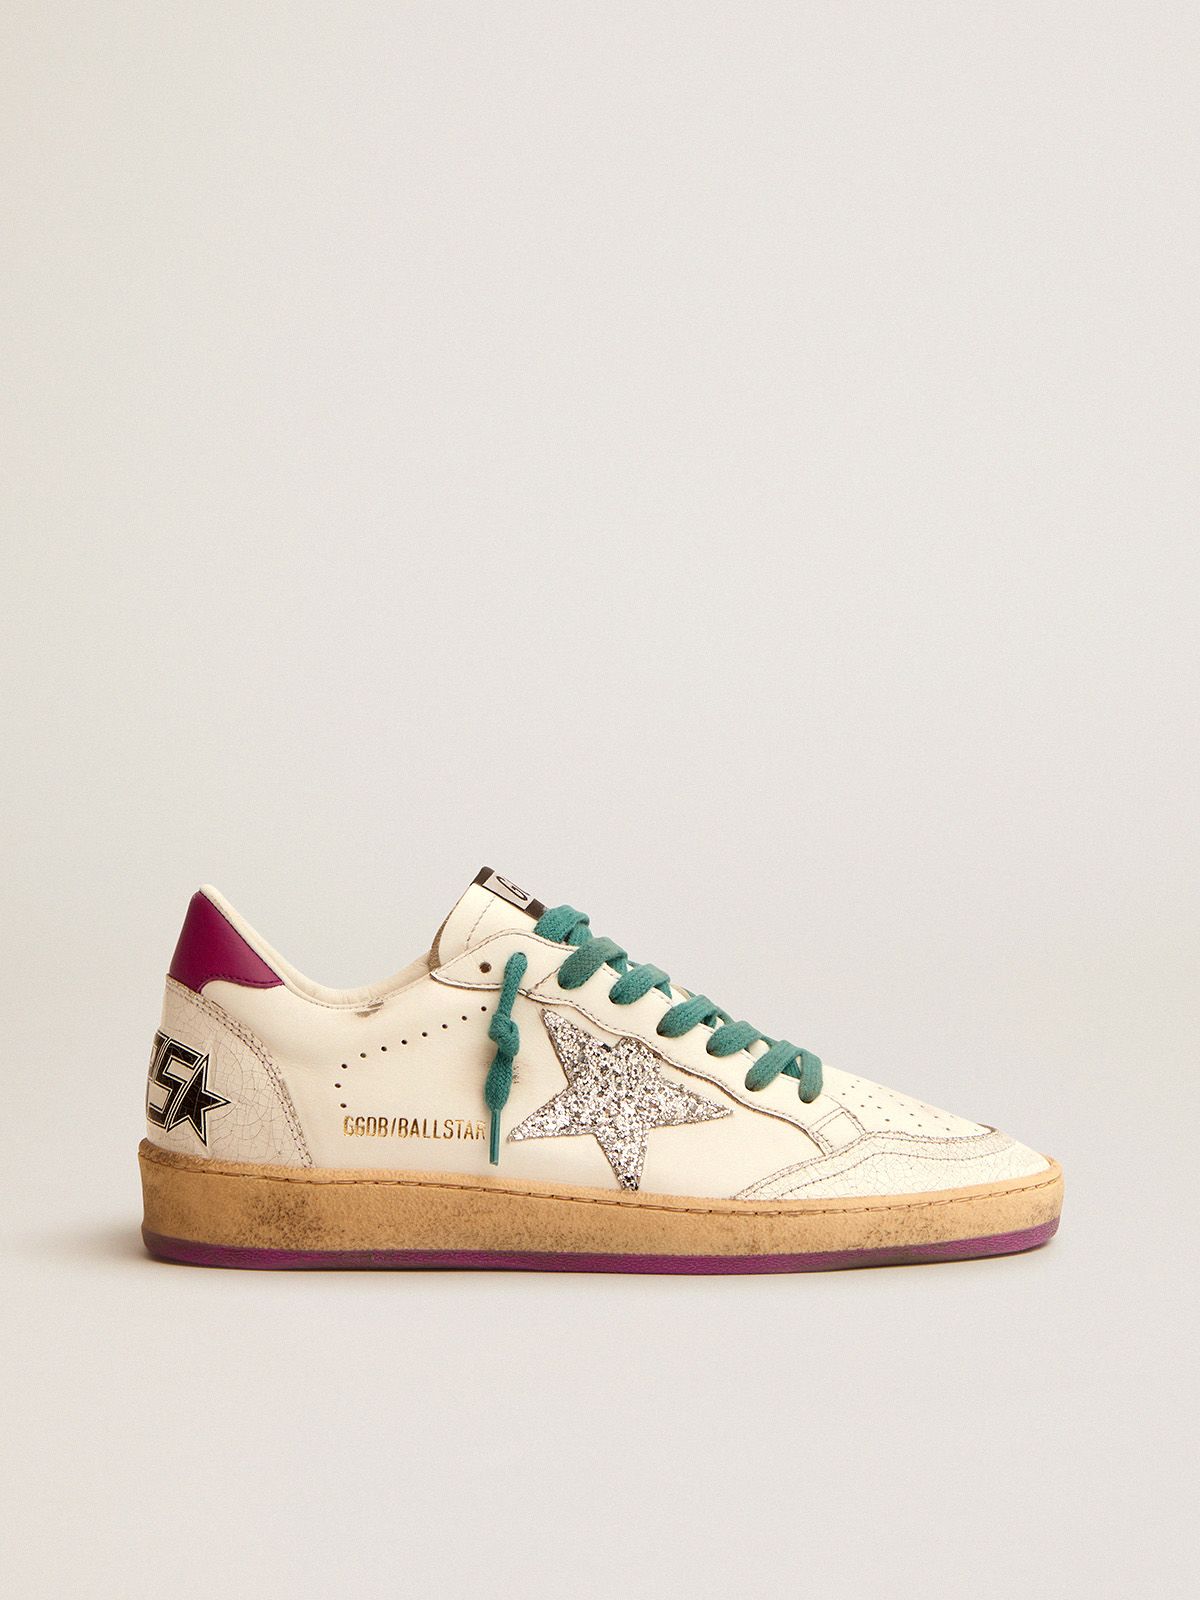 Golden Goose Sneakers Donna Ball Star LTD sneakers in white leather with purple leather heel tab and silver glitter star